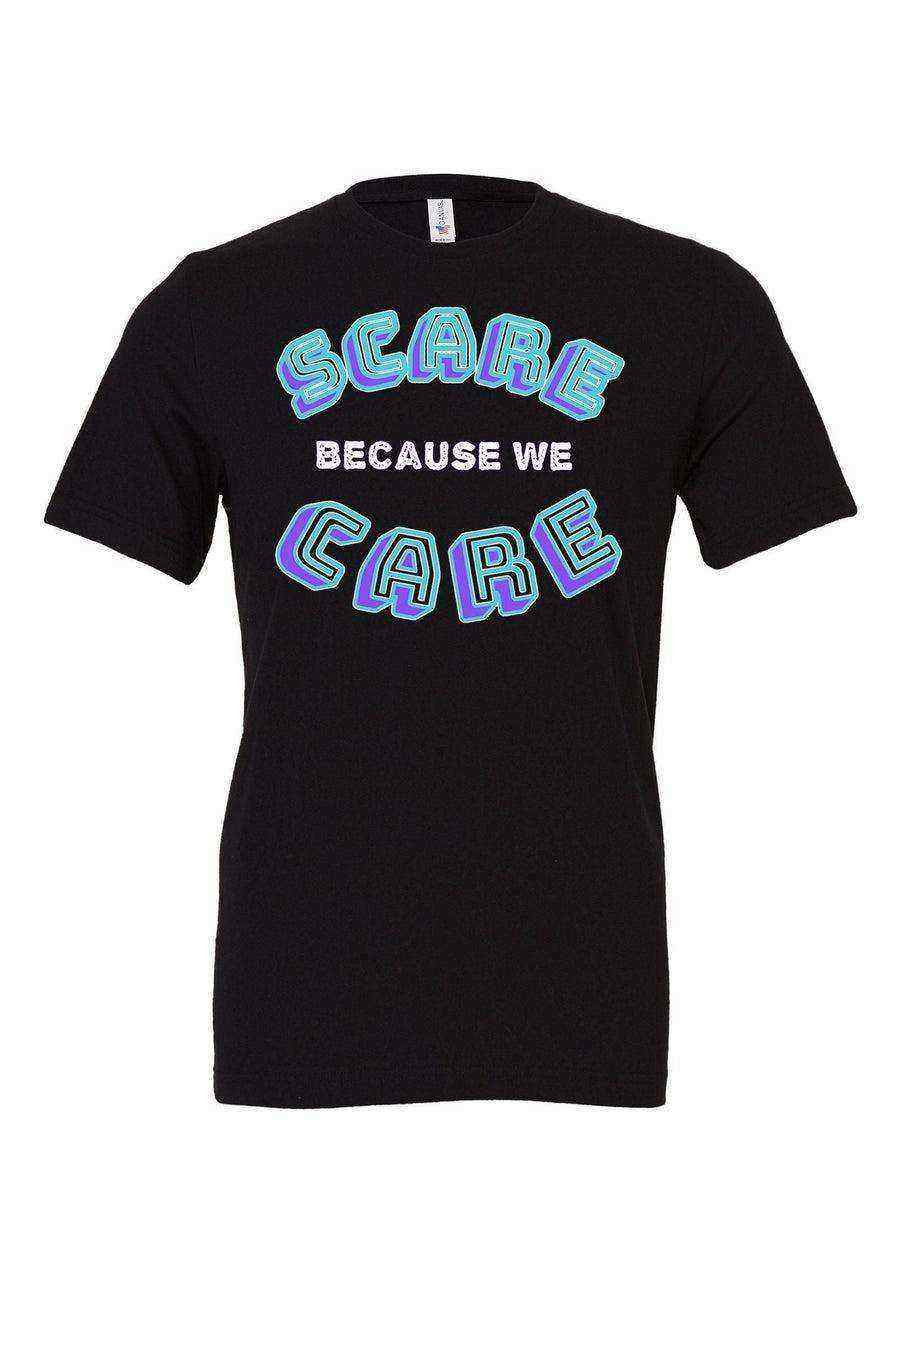 We Scare Because We Care Monsters Inc Shirt - Dylan's Tees